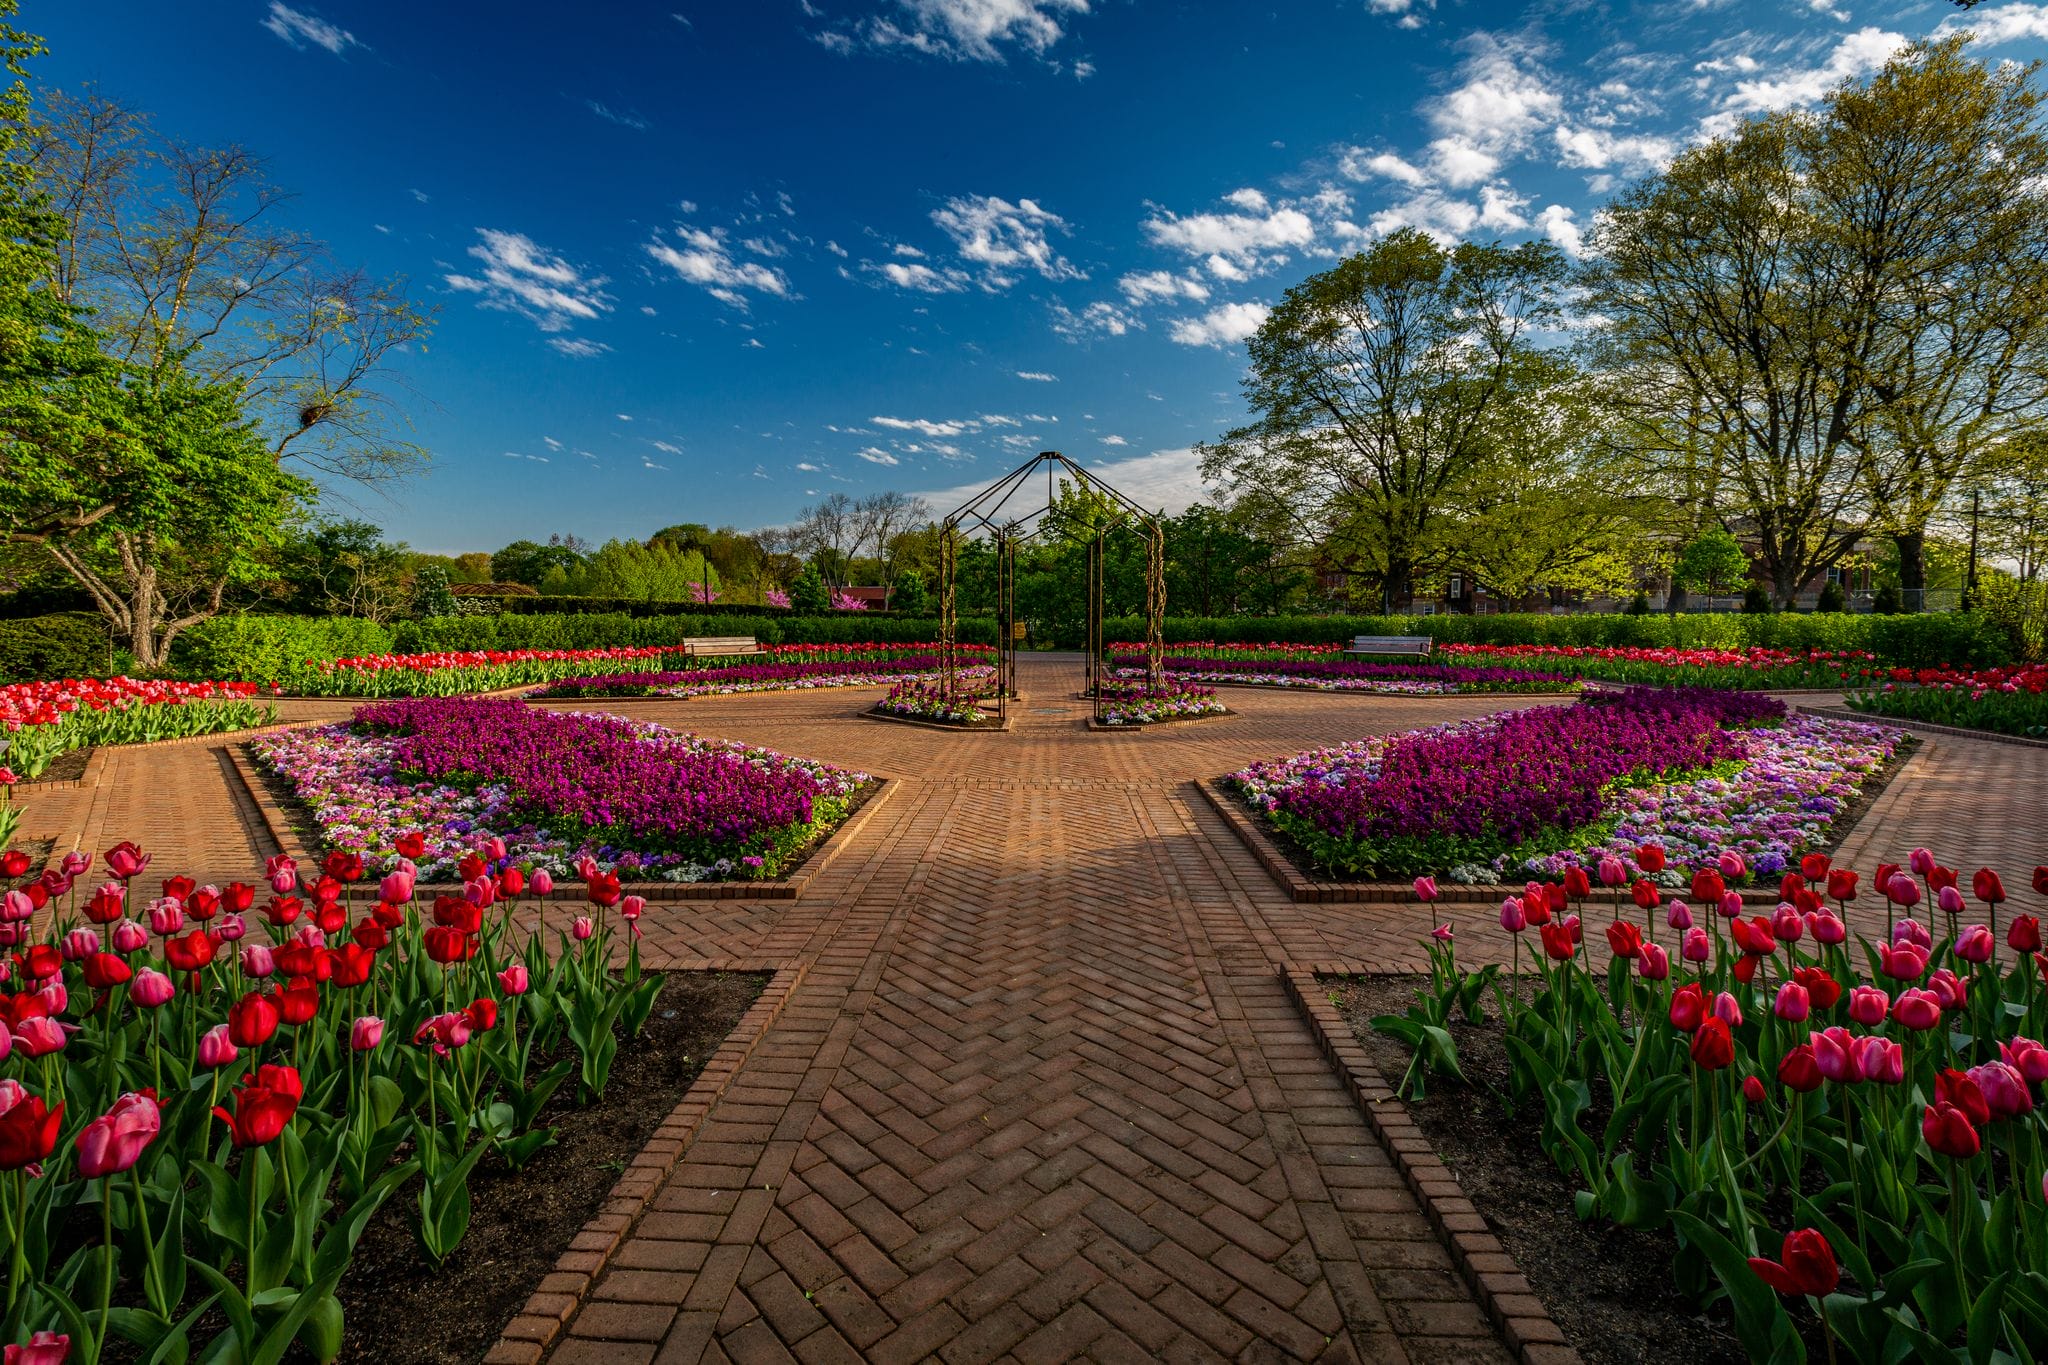 A FOURTH IMAGE OF THE CANTIGNY PARK STORY